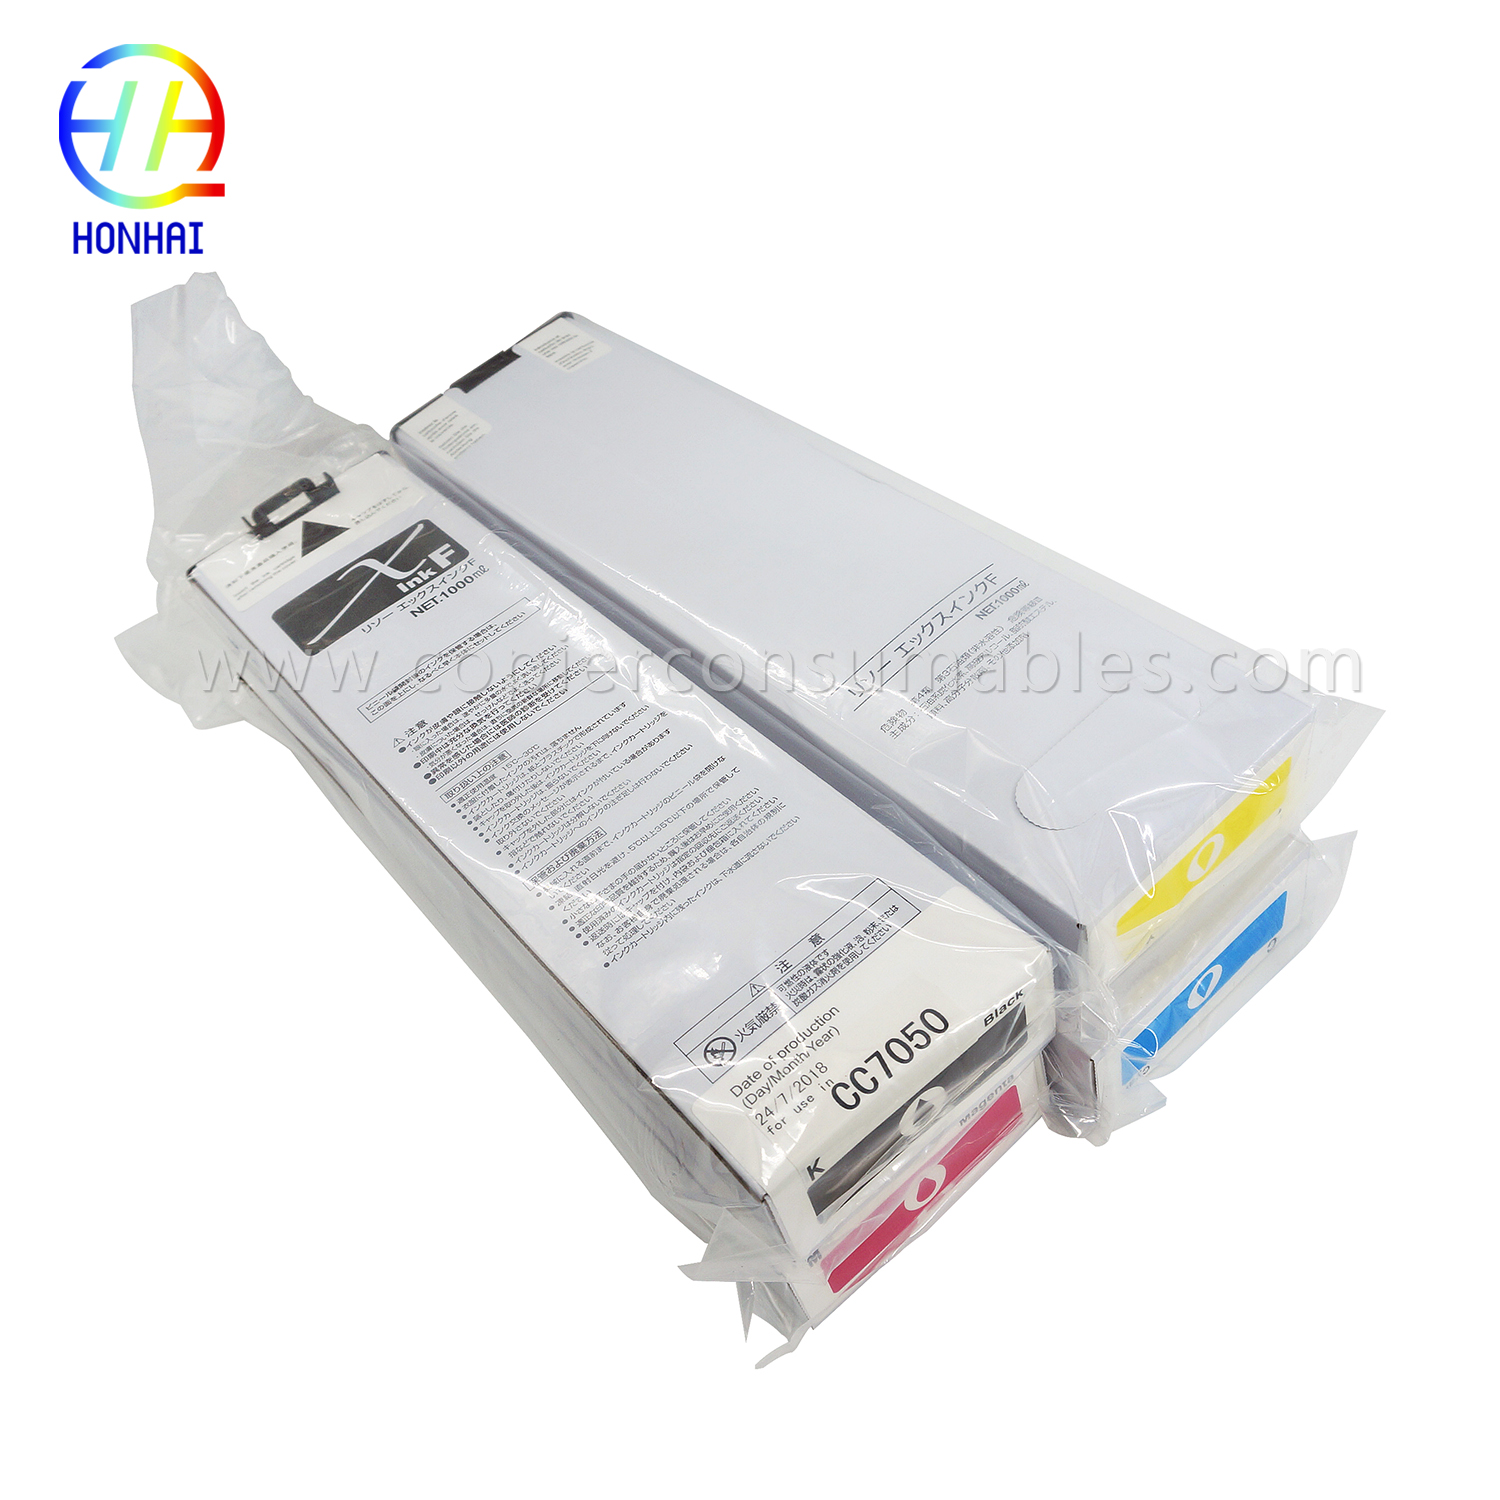 I-Ink Cartridge Risograph ComColor 3010 3050 3150 7010 7050 7150 9050 9150 HC 5000 5500 (S-6300G S-6301G S-6302G S-6303G) (8)